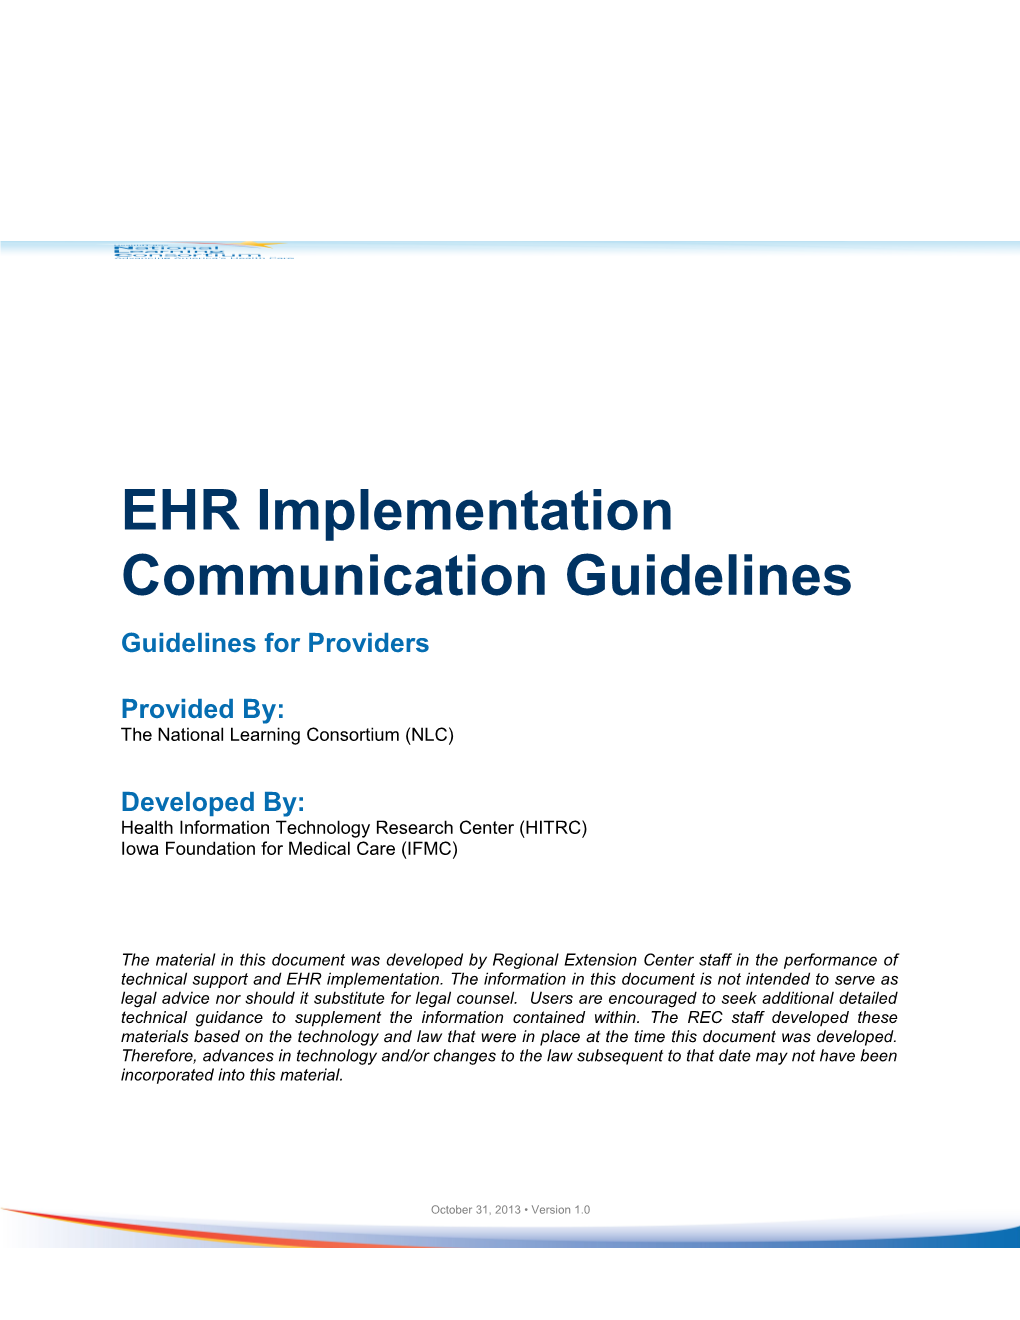 EHR Implementation Communication Guidelines for Providers